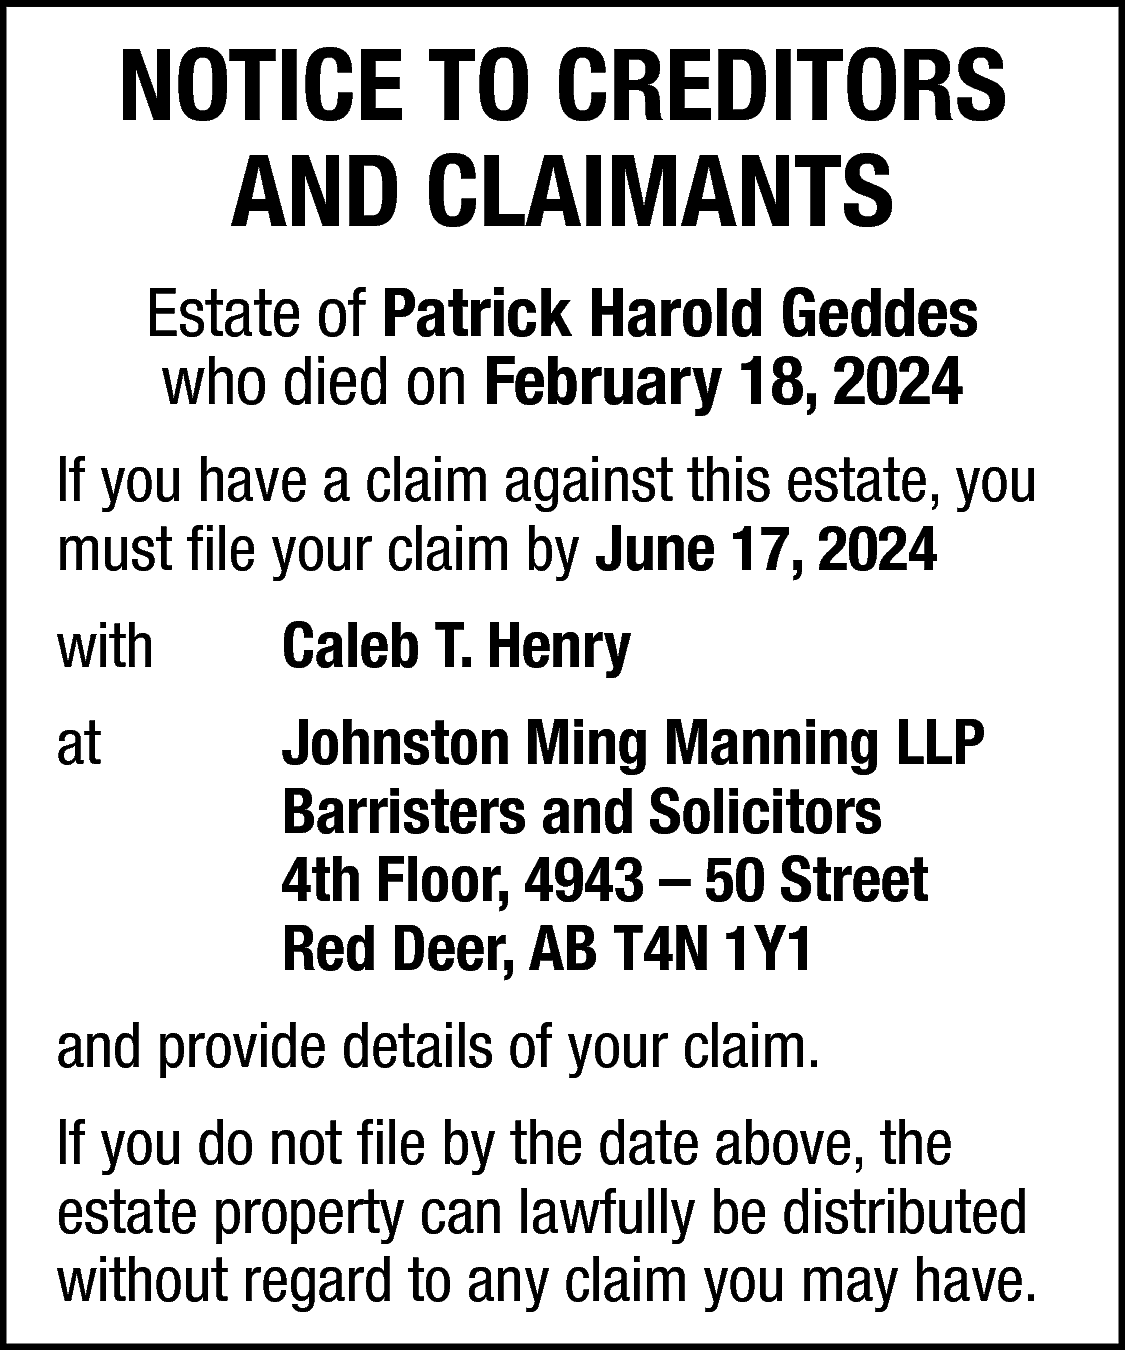 NOTICE TO CREDITORS <br>AND CLAIMANTS  NOTICE TO CREDITORS  AND CLAIMANTS  Estate of Patrick Harold Geddes  who died on February 18, 2024  If you have a claim against this estate, you  must file your claim by June 17, 2024  with    Caleb T. Henry    at    Johnston Ming Manning LLP  Barristers and Solicitors  4th Floor, 4943 – 50 Street  Red Deer, AB T4N 1Y1    and provide details of your claim.  If you do not file by the date above, the  estate property can lawfully be distributed  without regard to any claim you may have.    